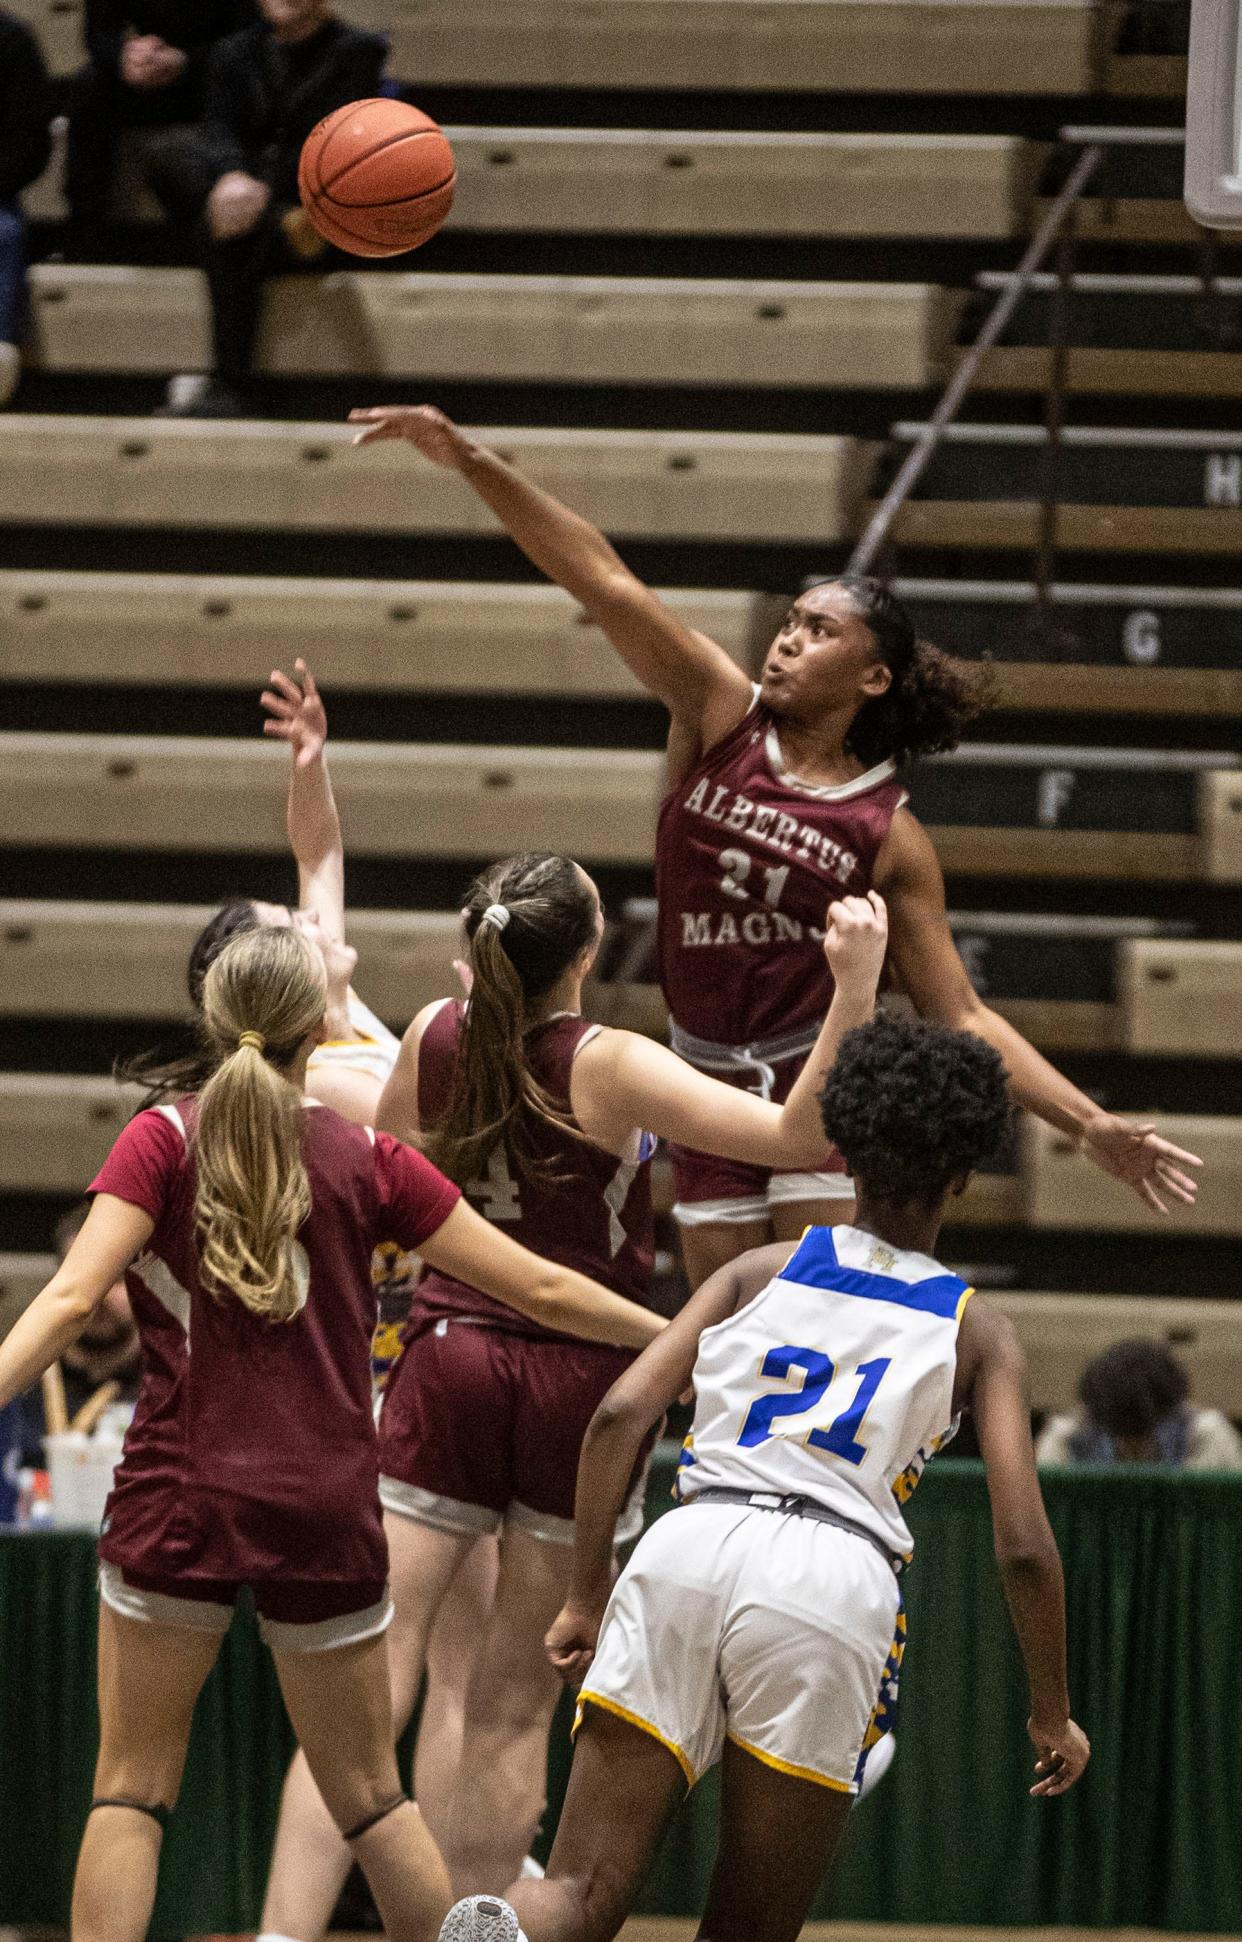 Mikaiya Beasley of Albertus Magnus blocks a shot against East Meadow in a New York State girls Class AA basketball semifinal at Hudson Valley Community College in Troy March 15, 2024. Albertus Magnus defeated East Meadow 89-51 to advance to the Class AA final on Saturday.